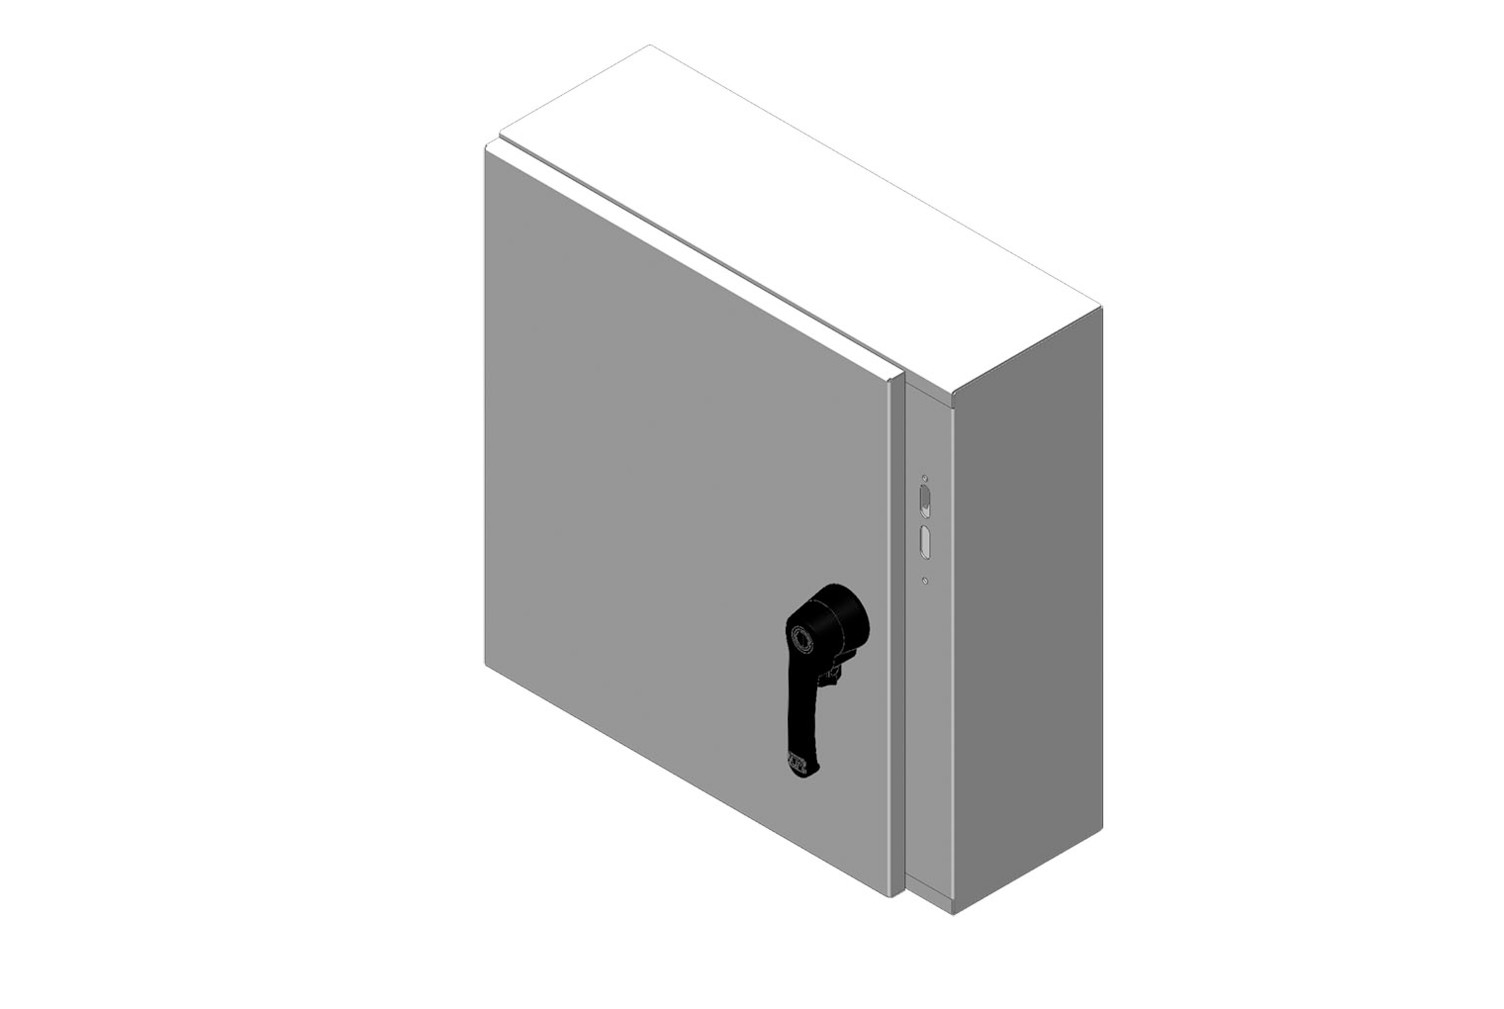 RMR Standard Wall-Mount Disconnect Enclosure, Type 4, with Solid Single Door - Image 0 - Large